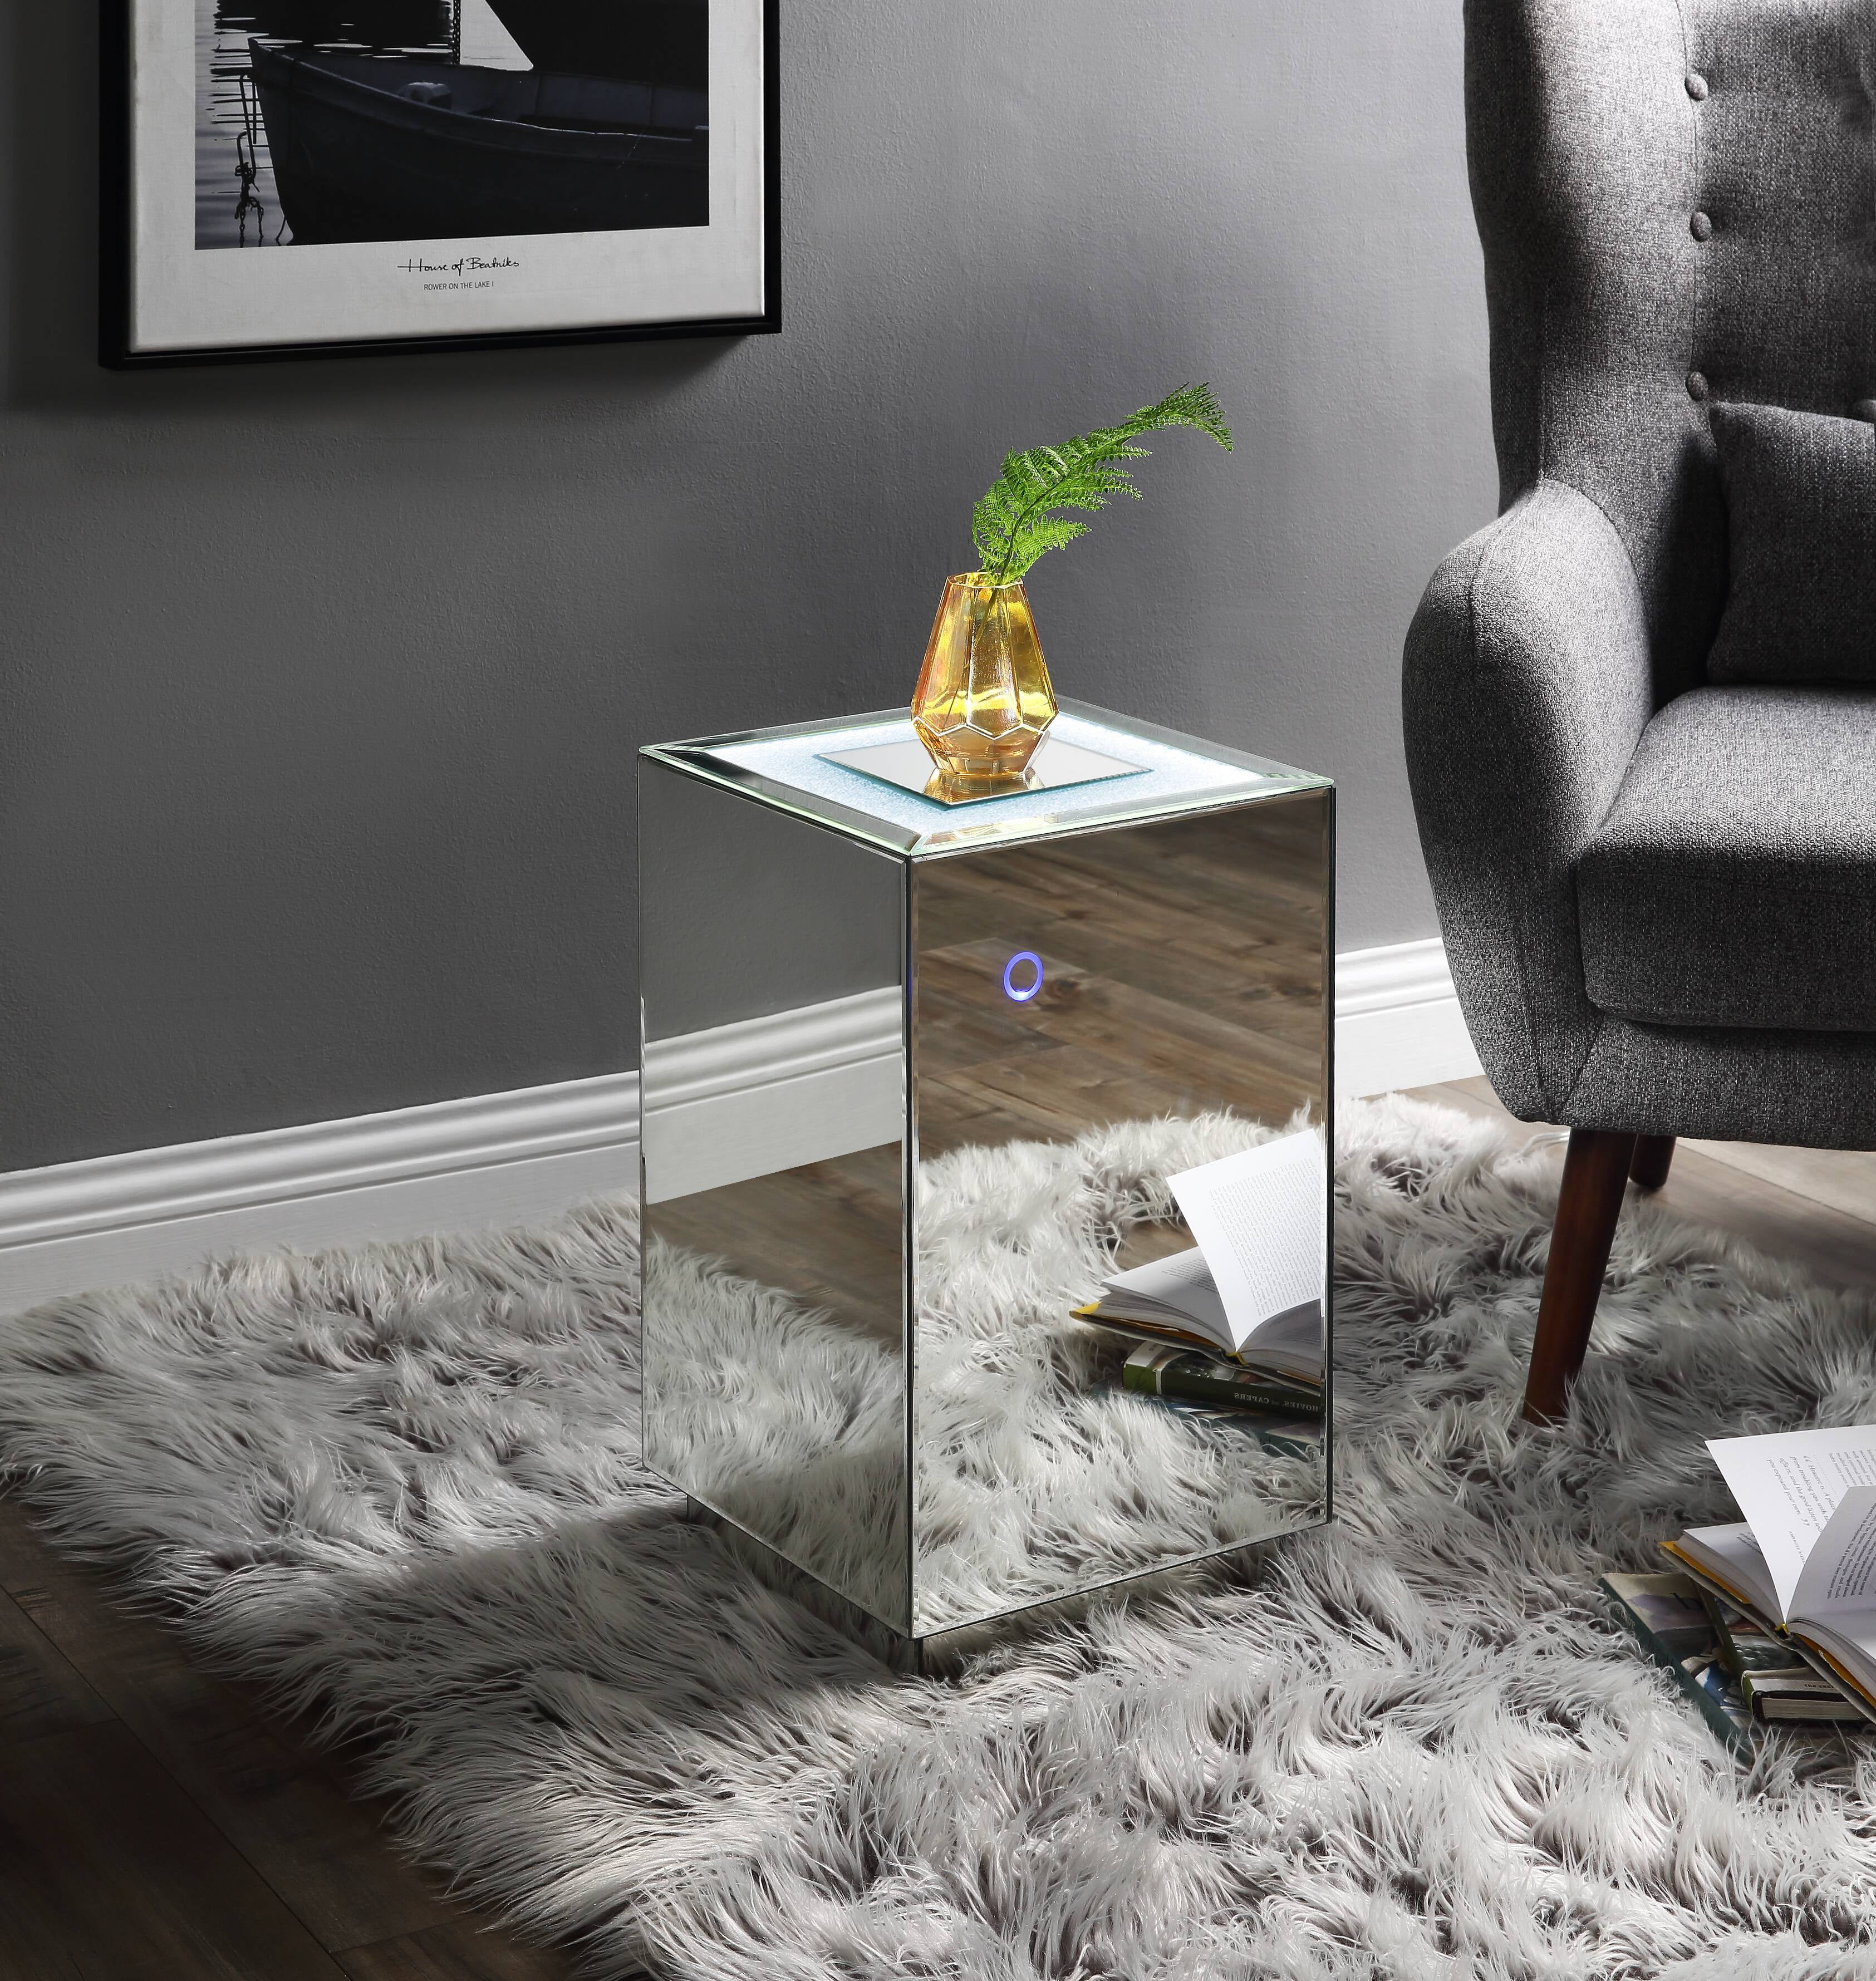 Chelsea Lane Mirror End Table With, Chelsea Lane Mirror End Table With Drawer Chrome